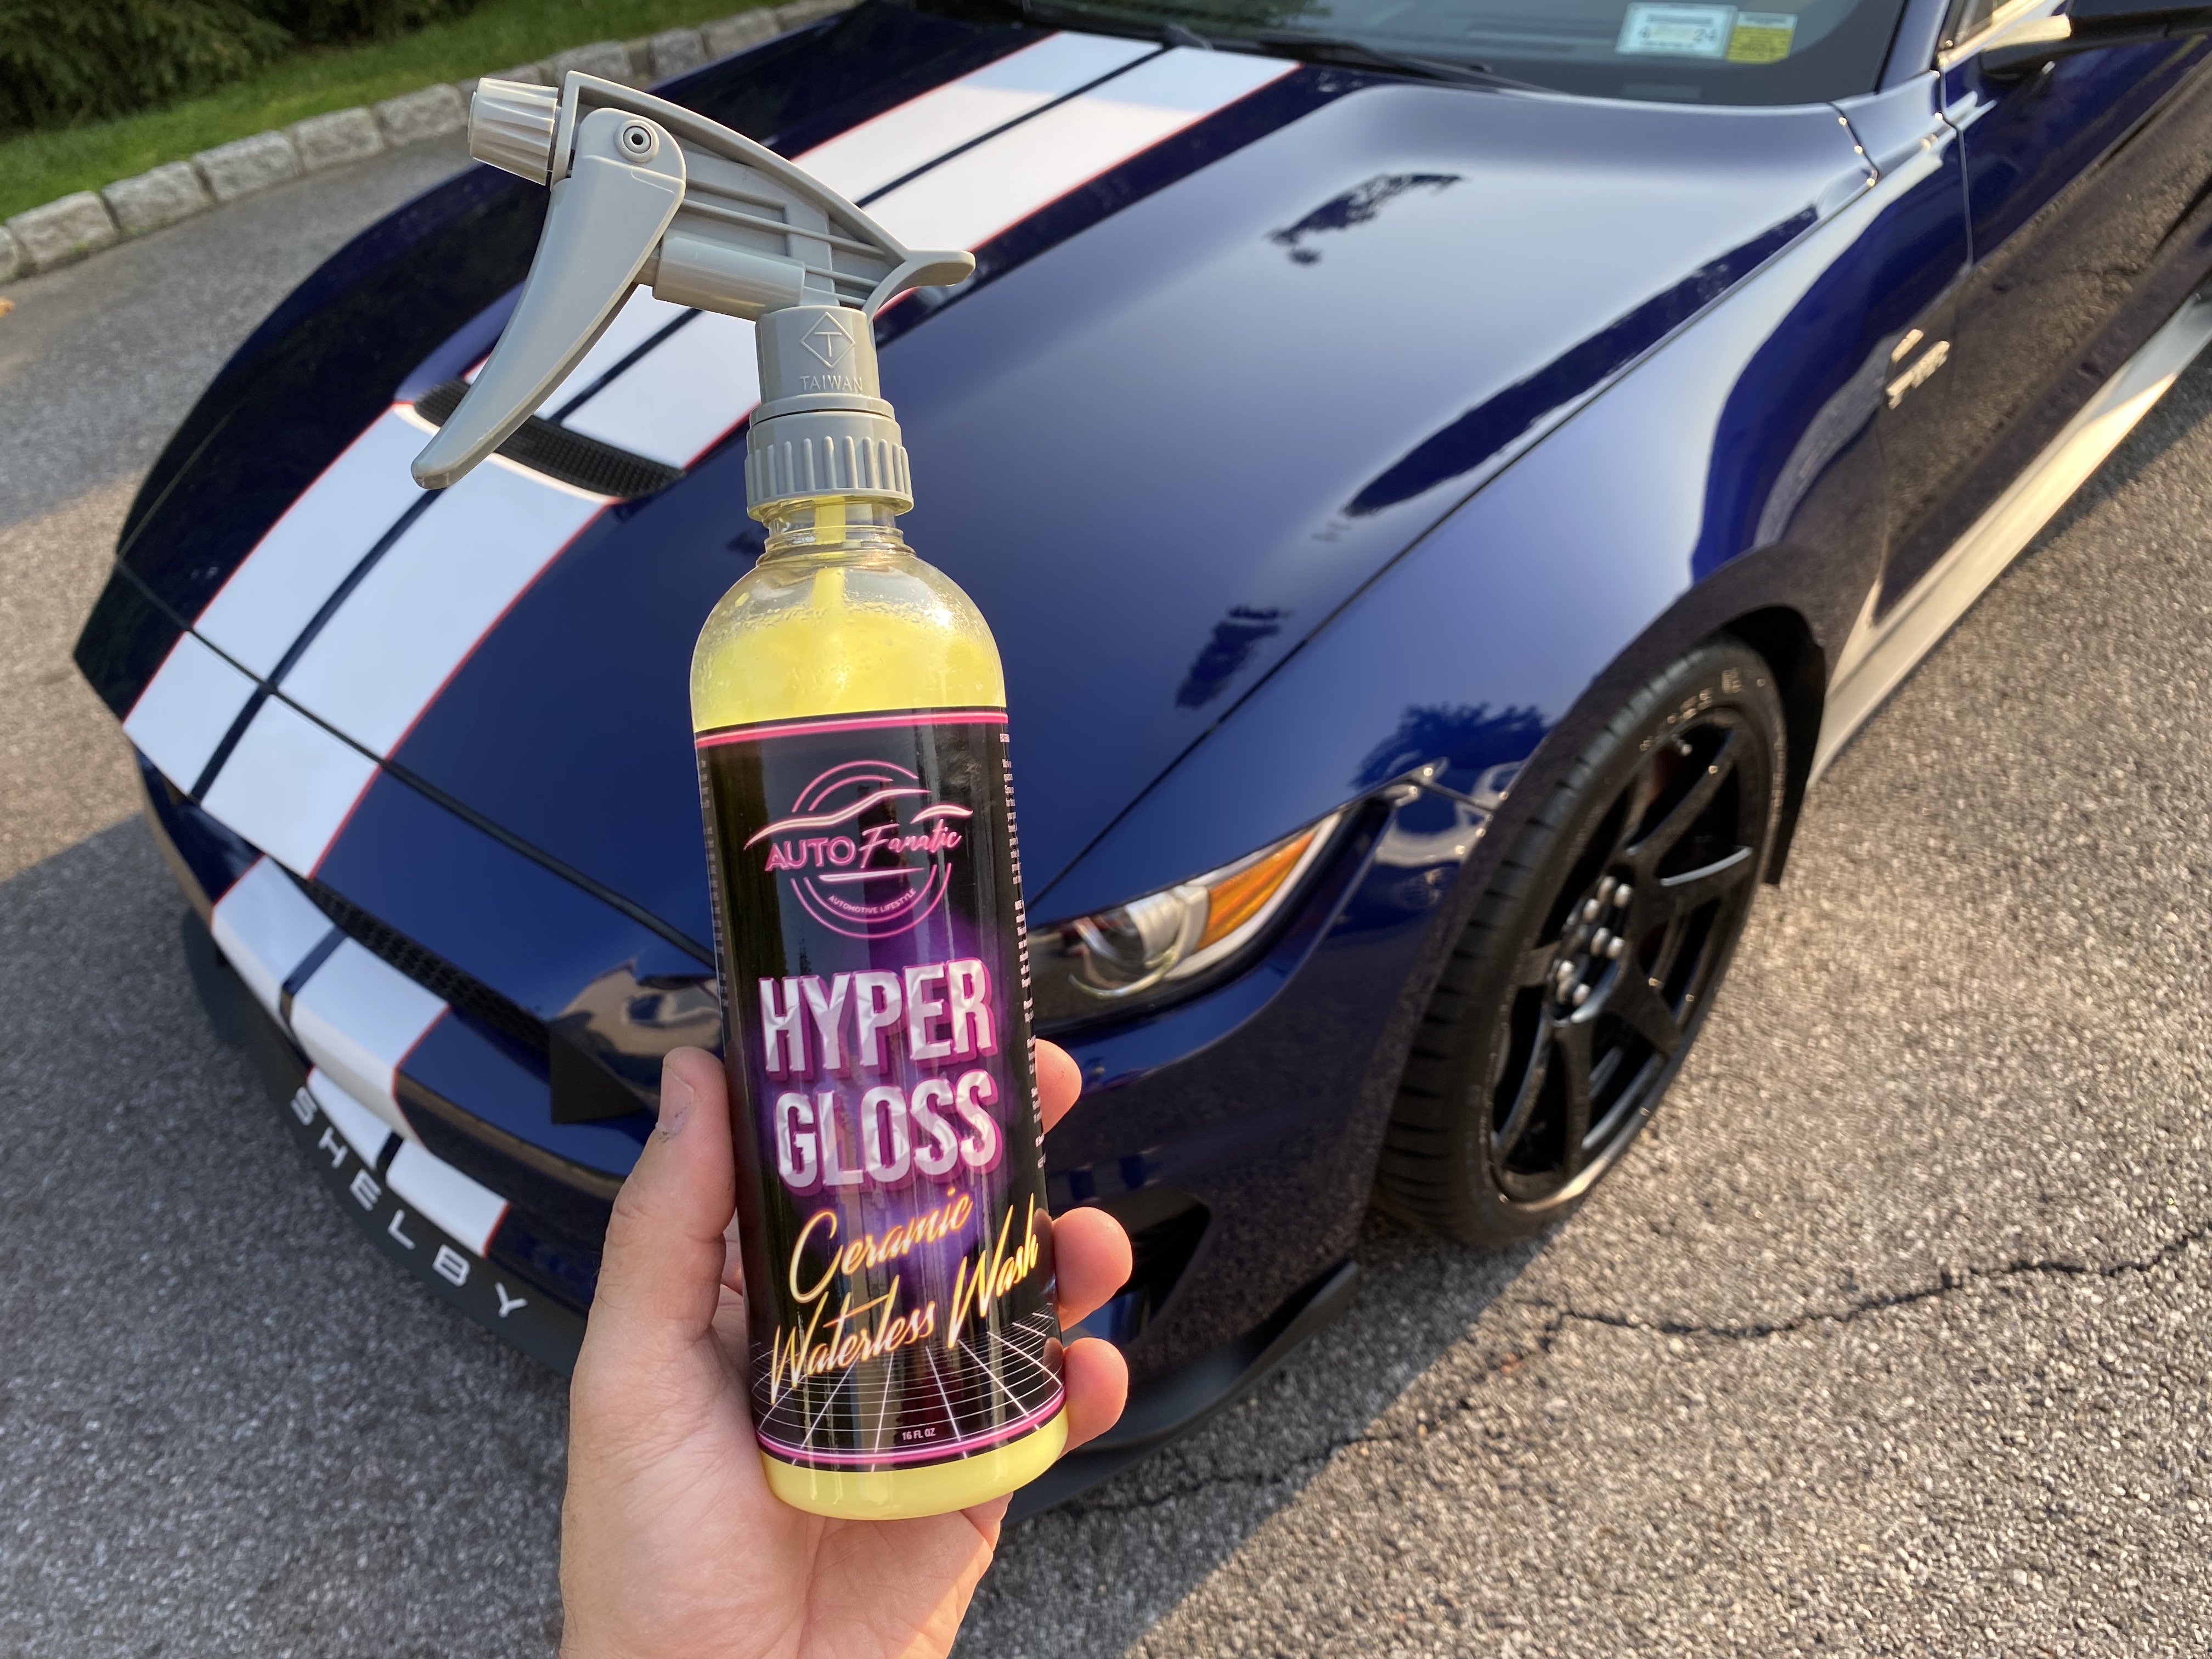 Hyper One Automotive Solutions Hyper One Waterless Car Wash and Wax Spray 16 fl oz High Glossy Spray Wax for Car Interior and Exterior Detailing Quick